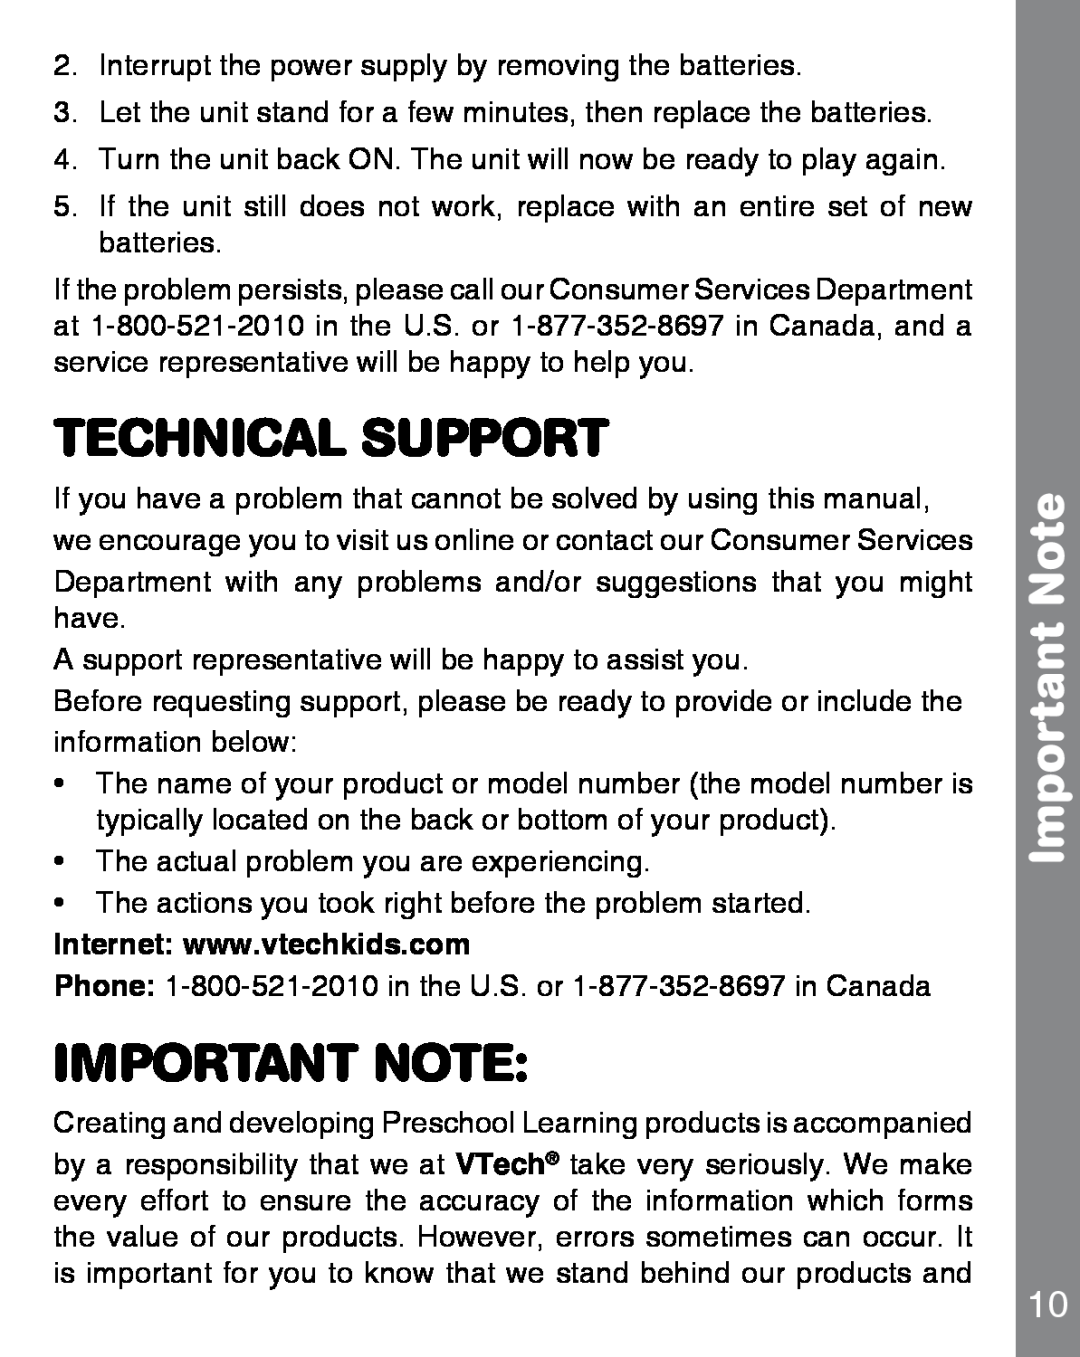 VTech 91-002815-008 user manual Technical Support, Important Note 